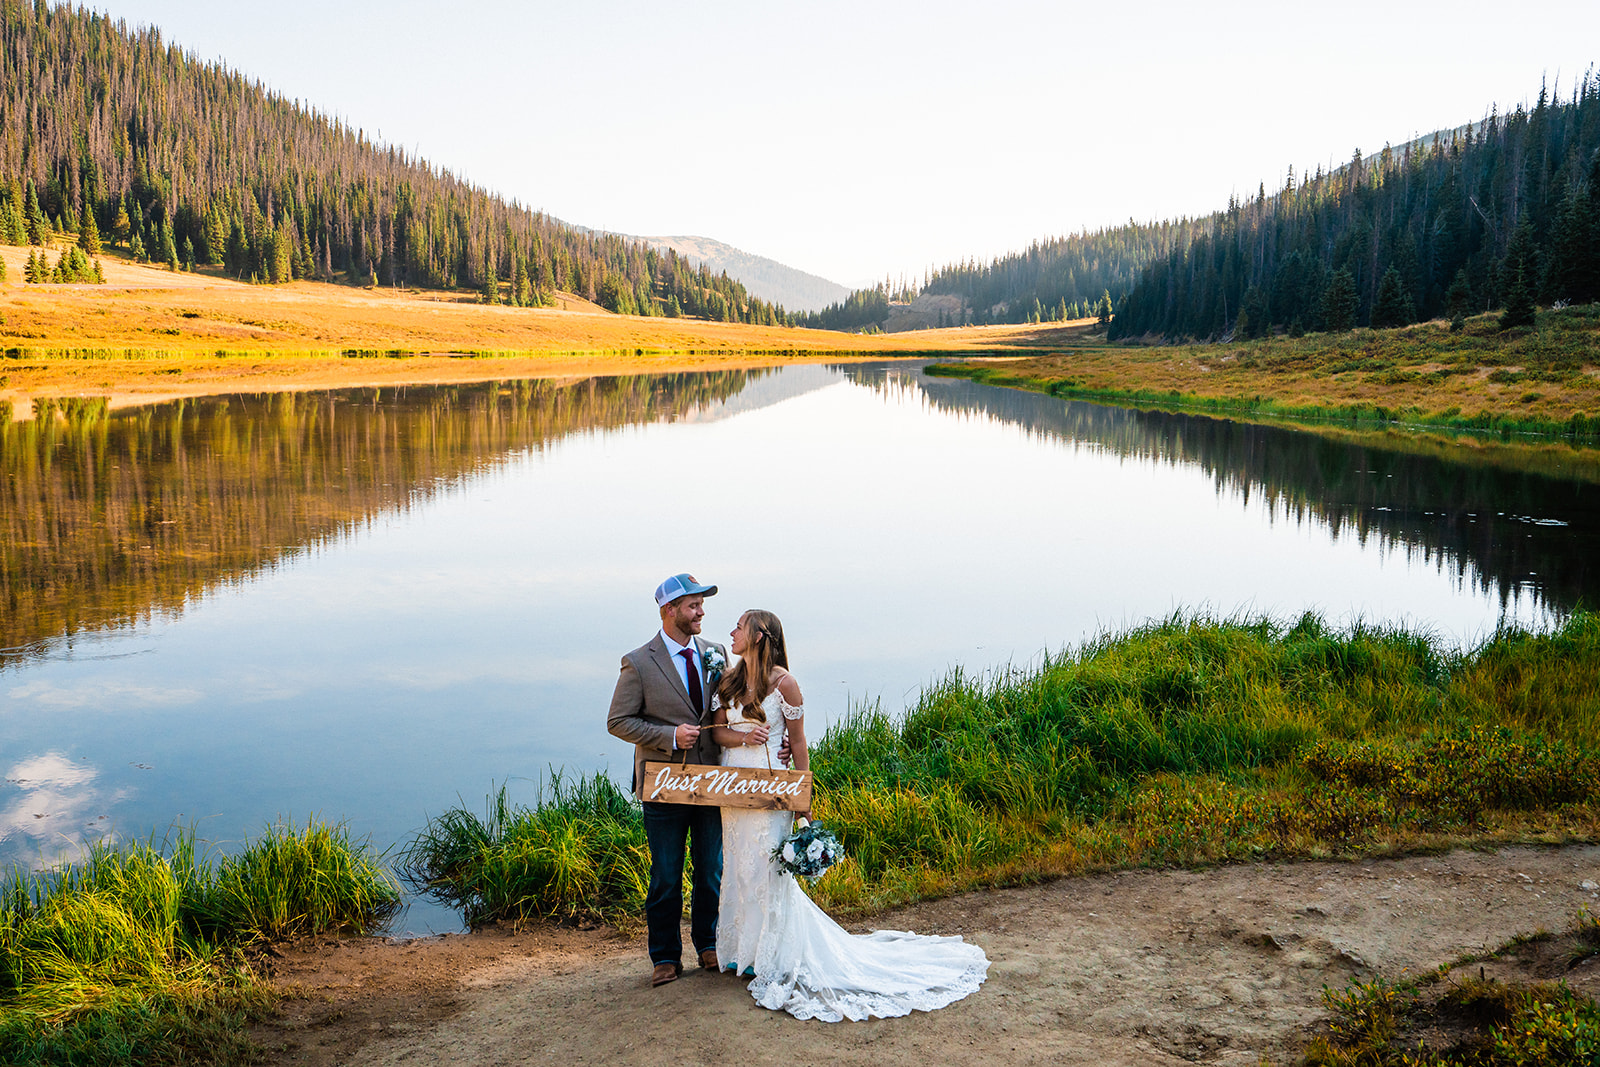 Mountaintop-Stunning Adventure Filled Couples Photos at Trail Ridge Road